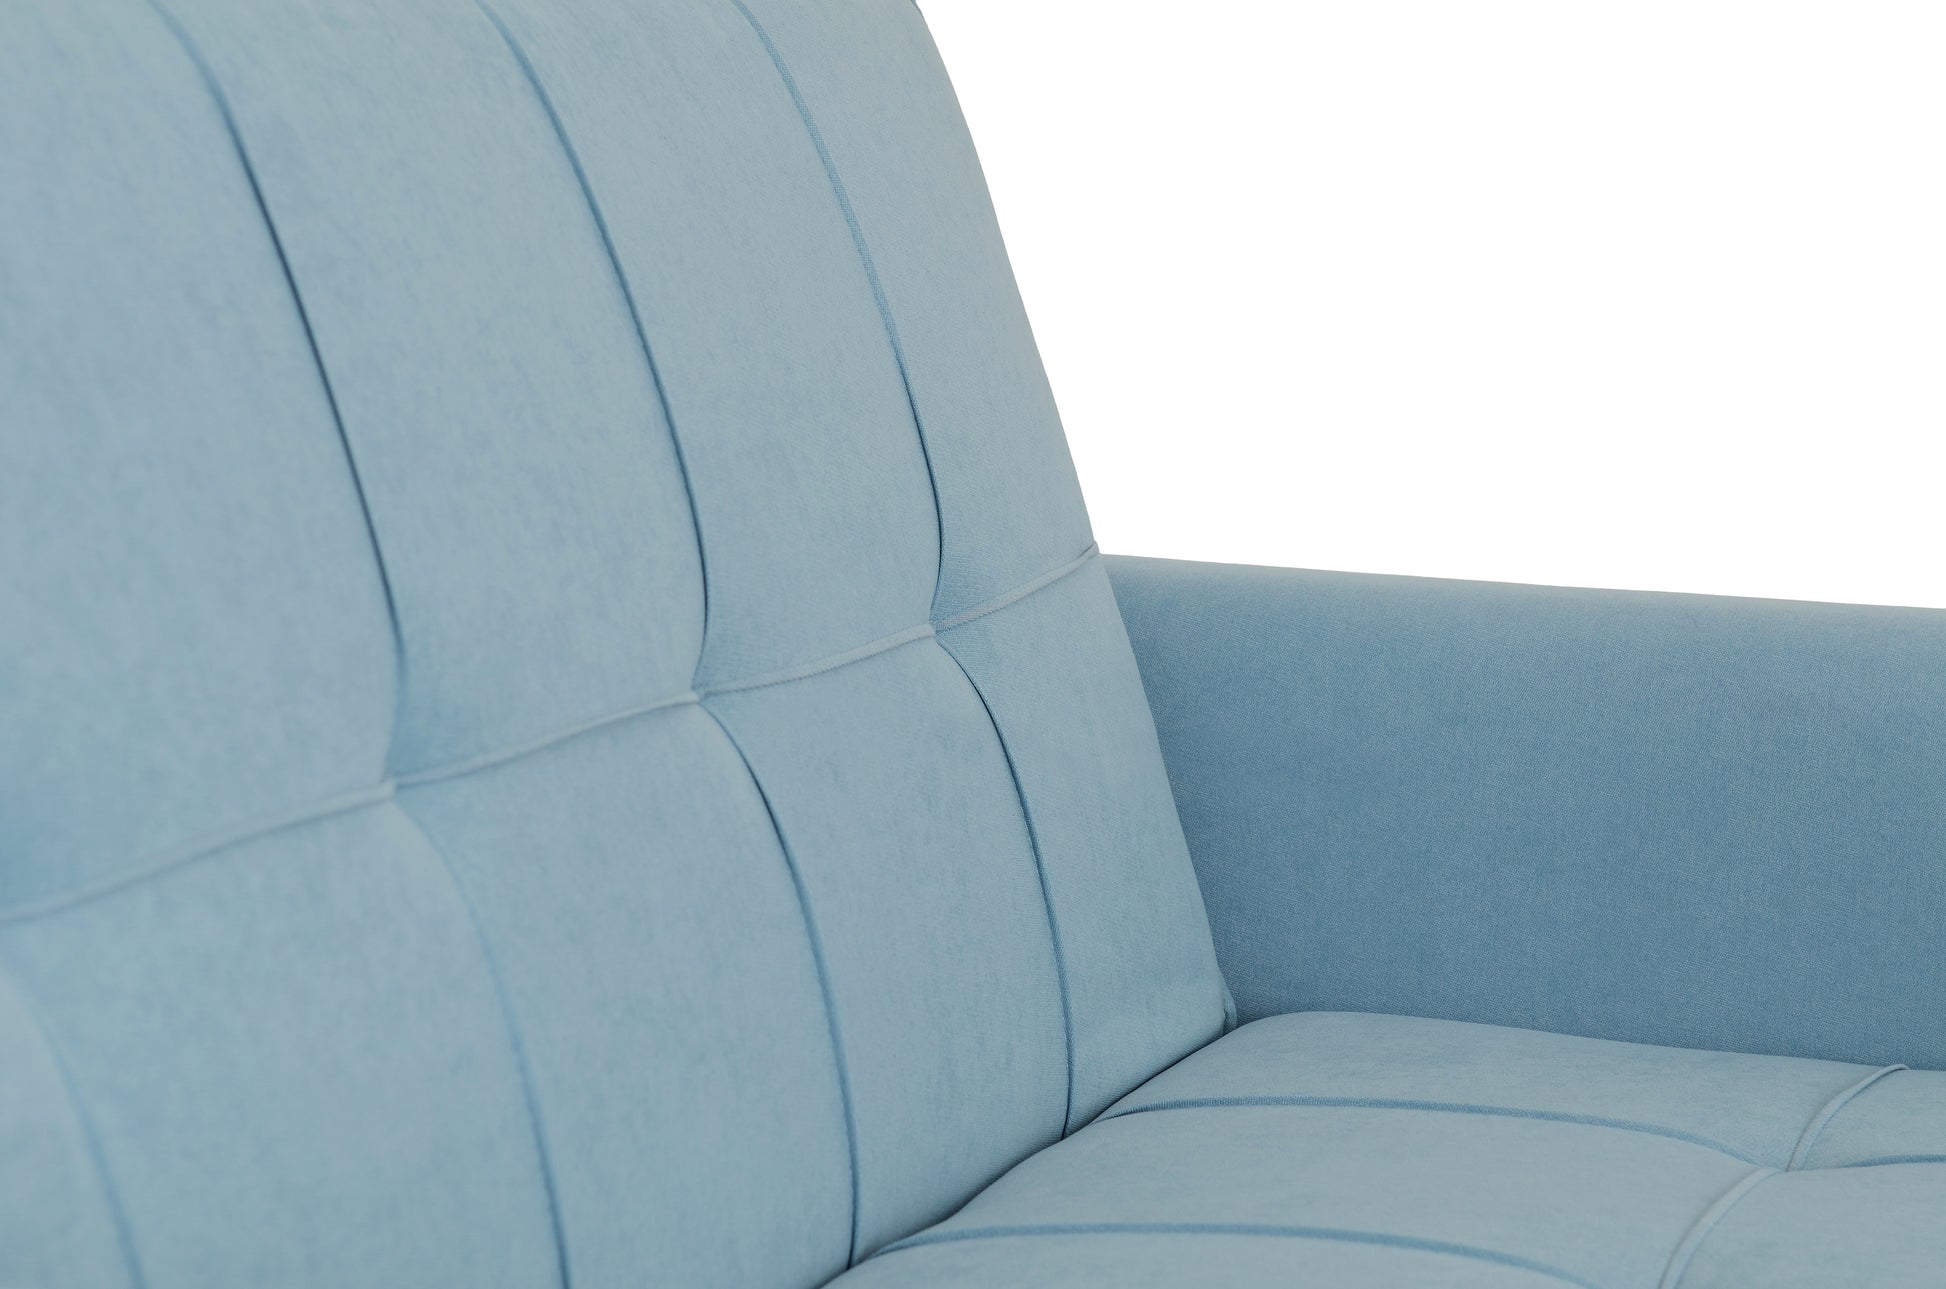 Astoria Sofa Bed - Light Blue Fabric - The Right Buy Store